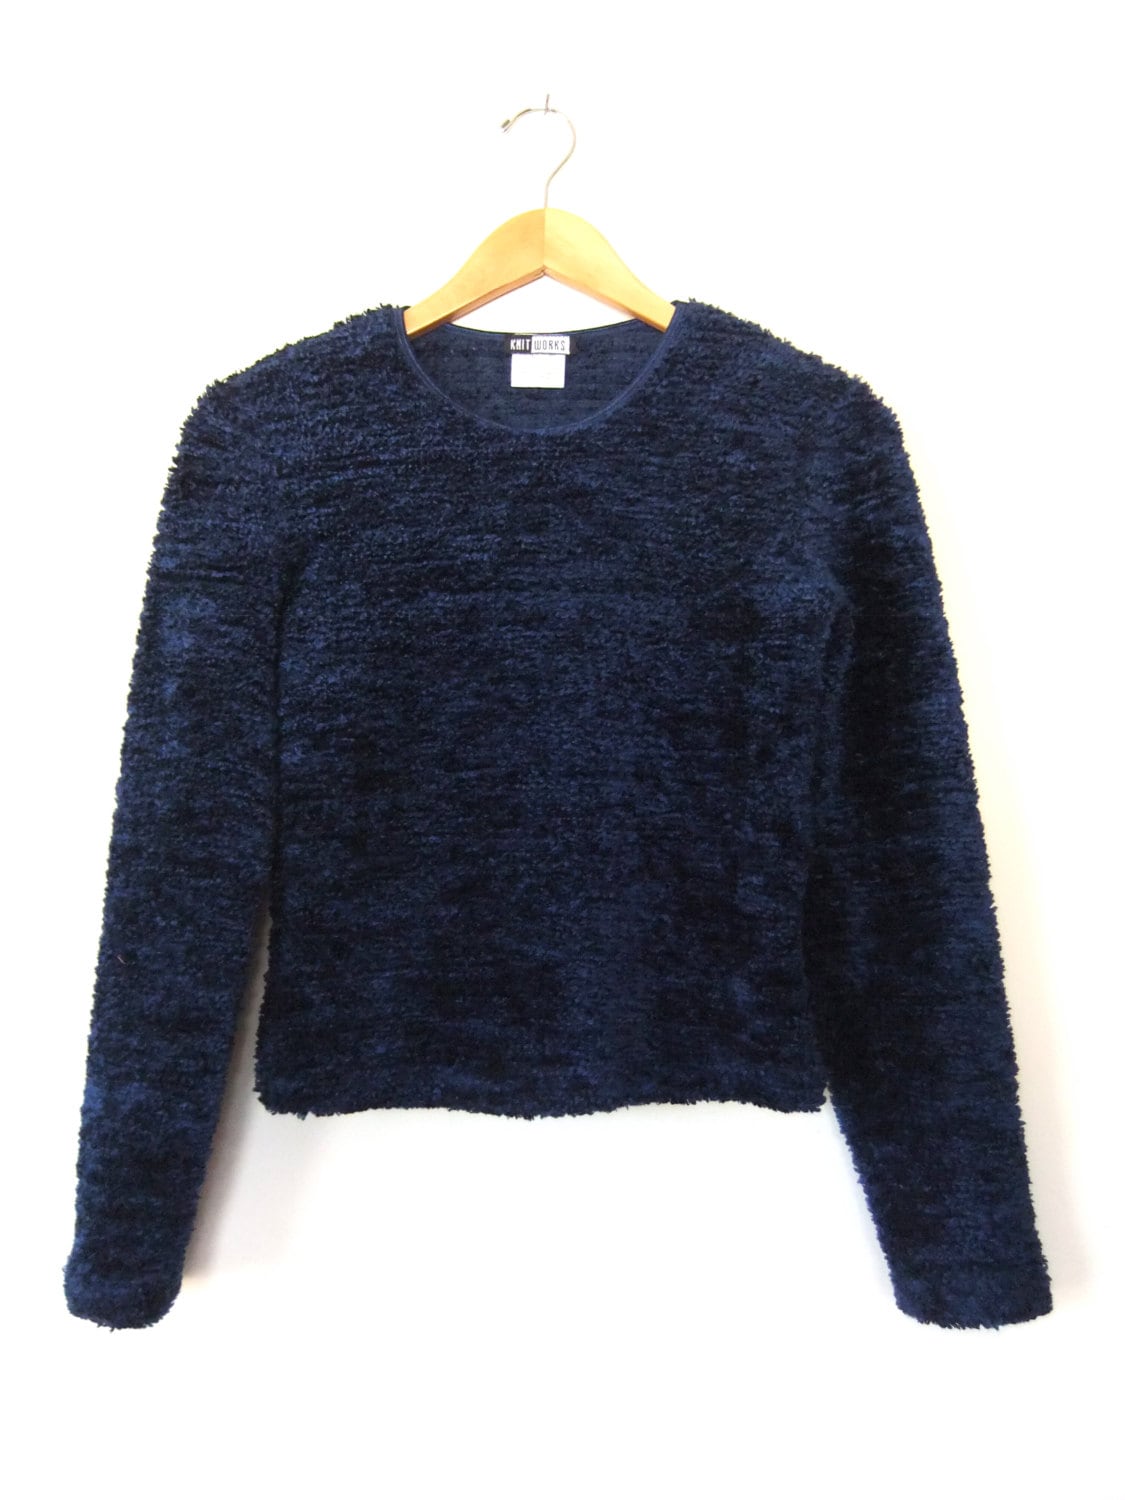 90s FUZZY Crop Top Sweater Navy Blue Shaggy Faux Fur Cropped